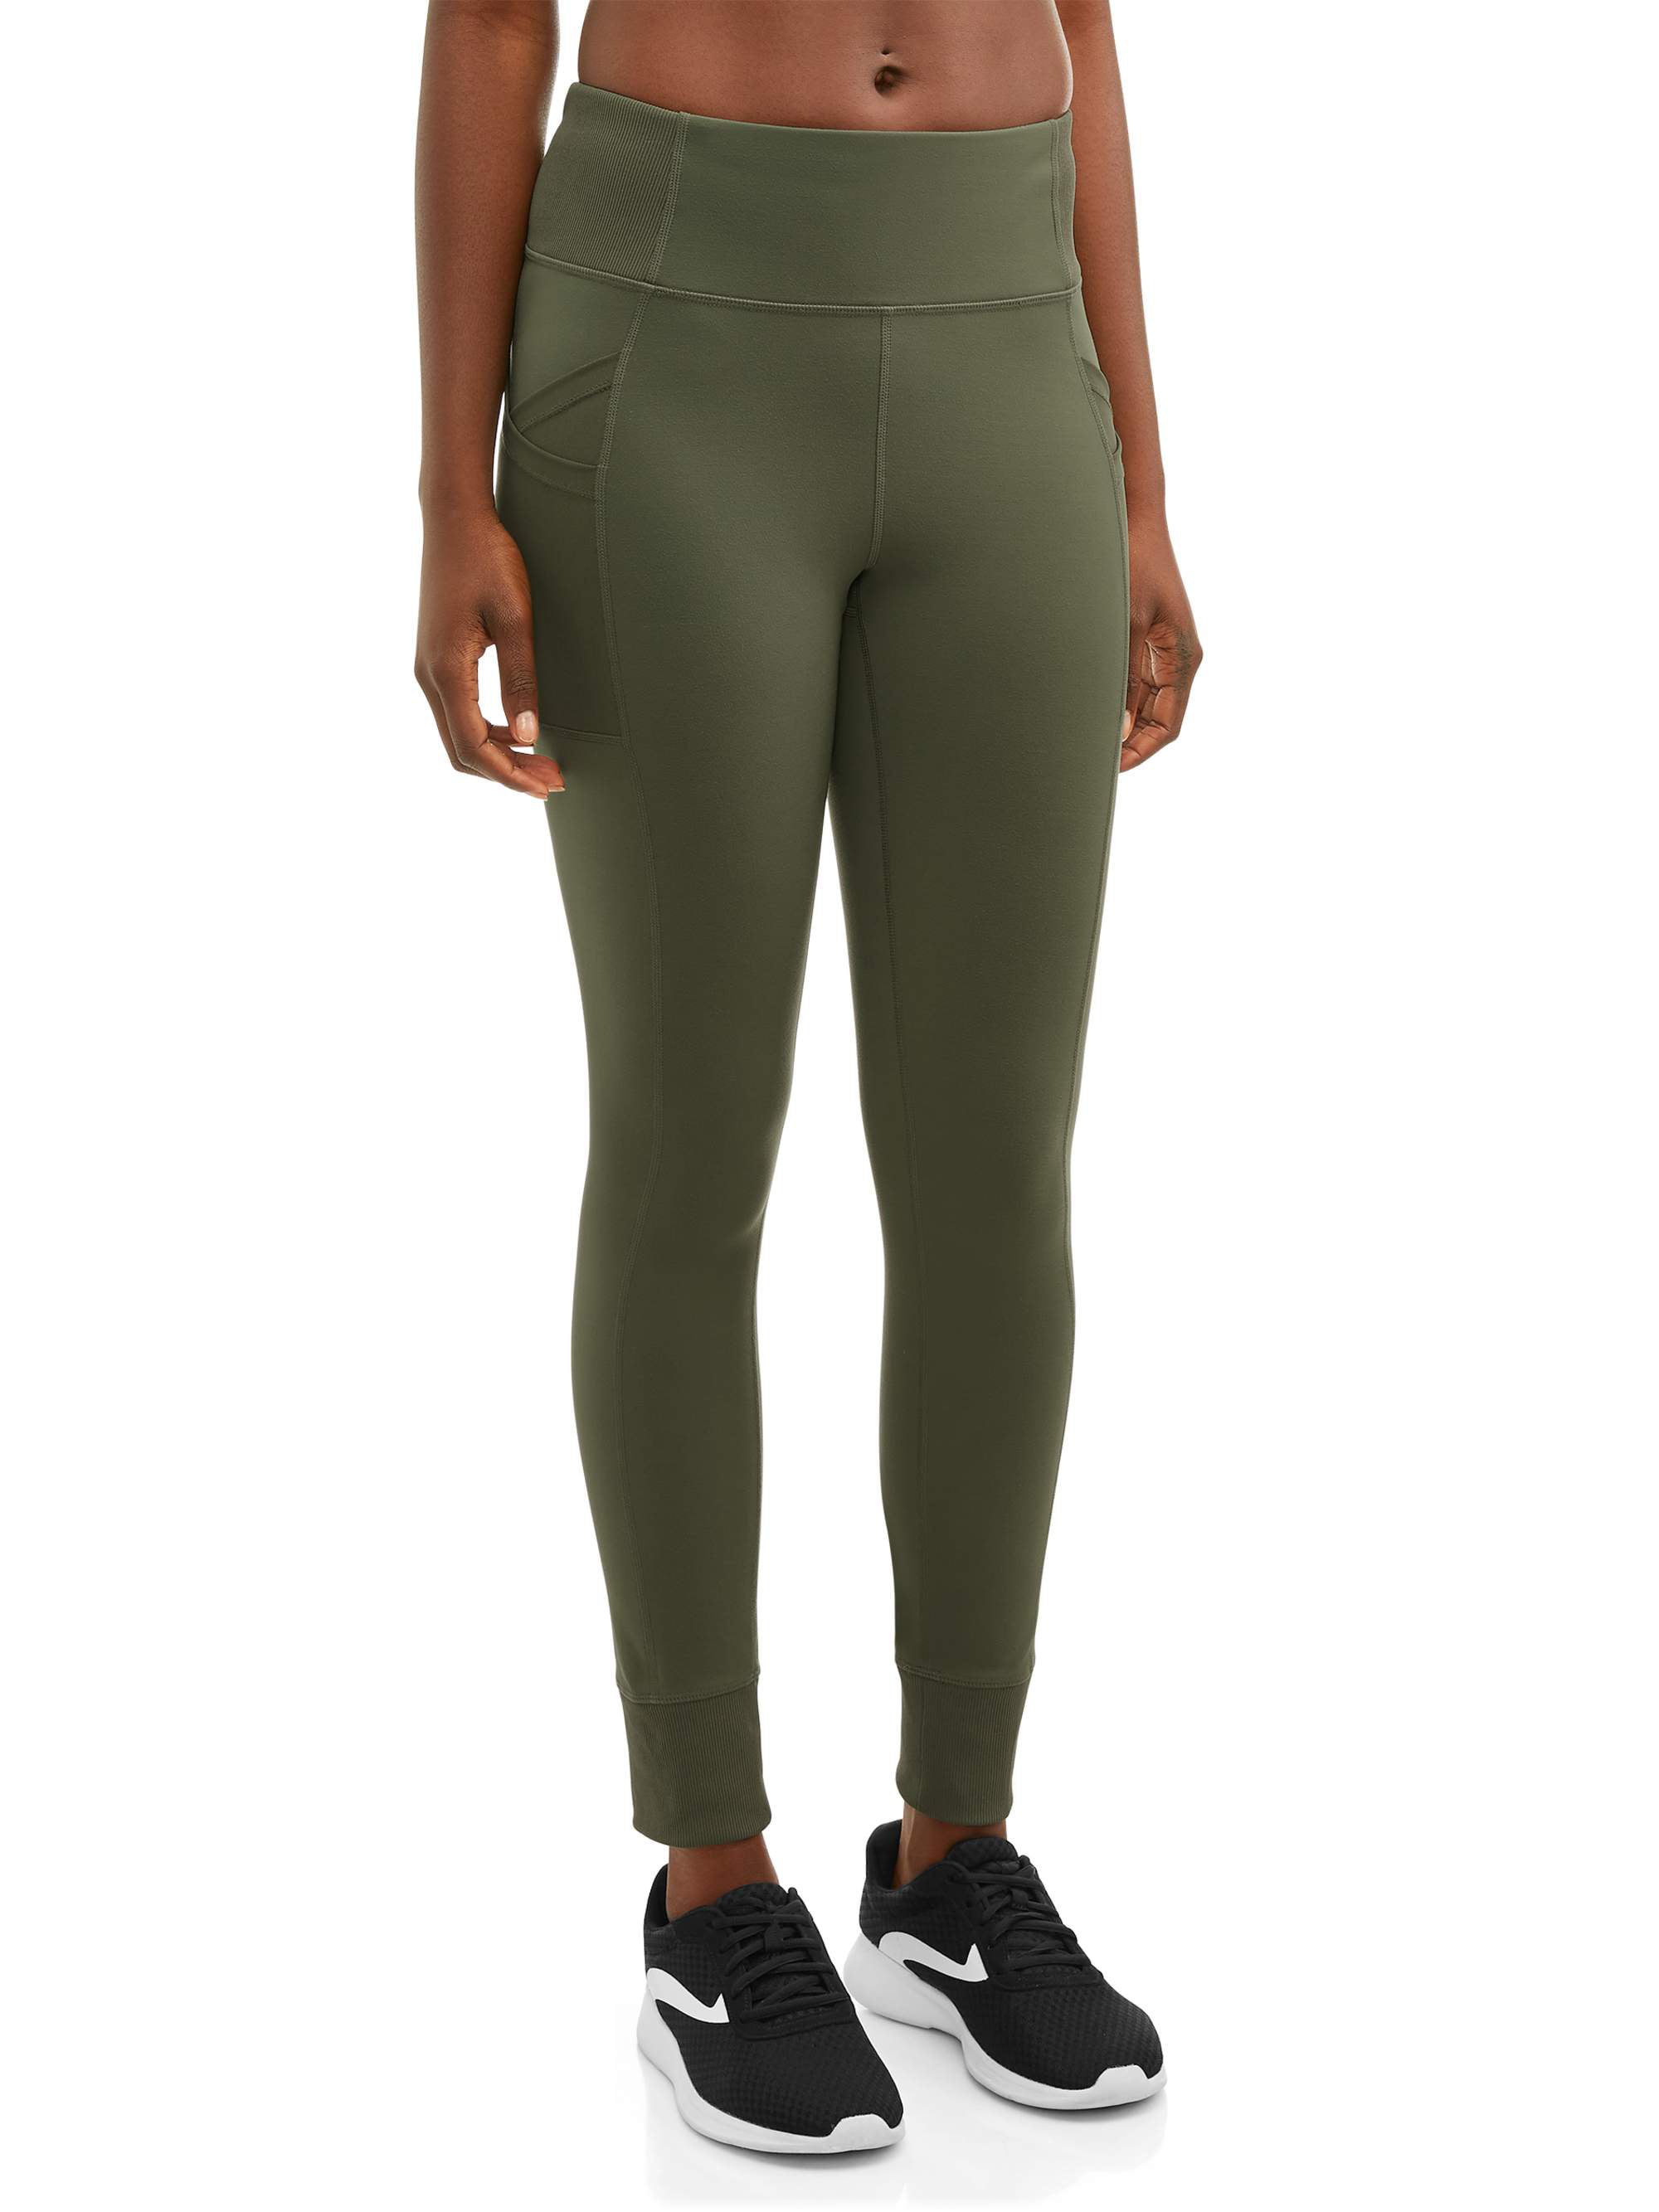 Avia Workout Leggings For Women  International Society of Precision  Agriculture